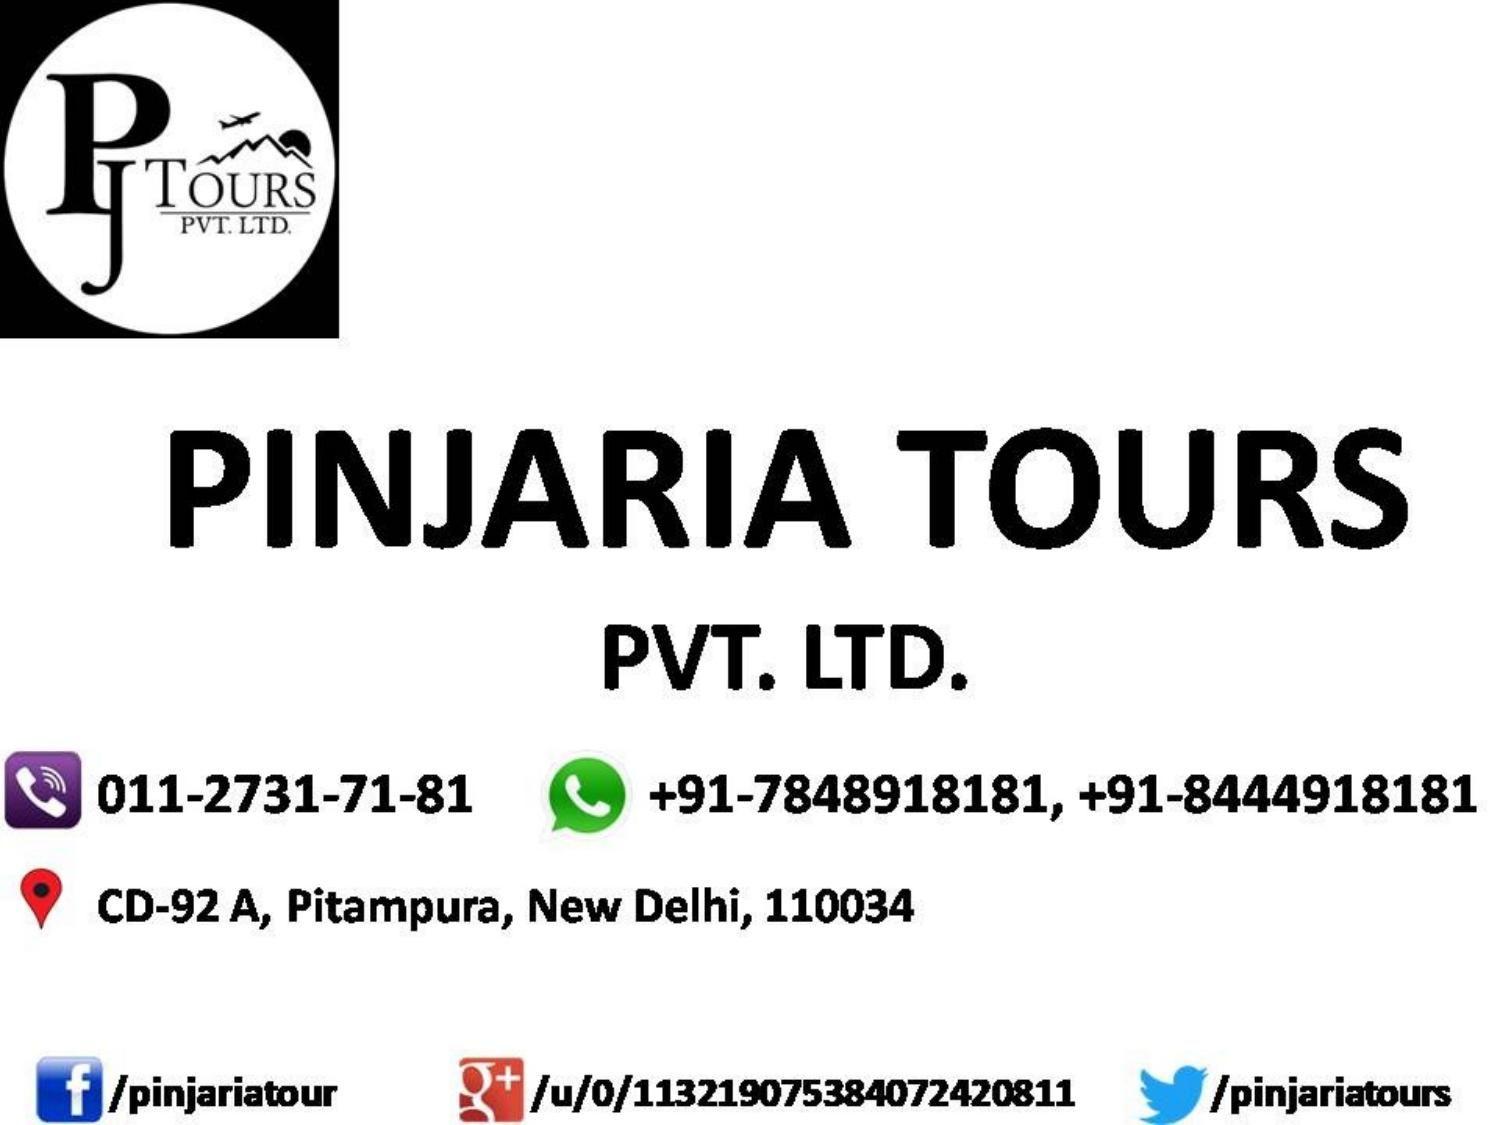 Major Airline Logo - India's airlines logos. Pinjaria Tours by Pinjaria Tours Pvt